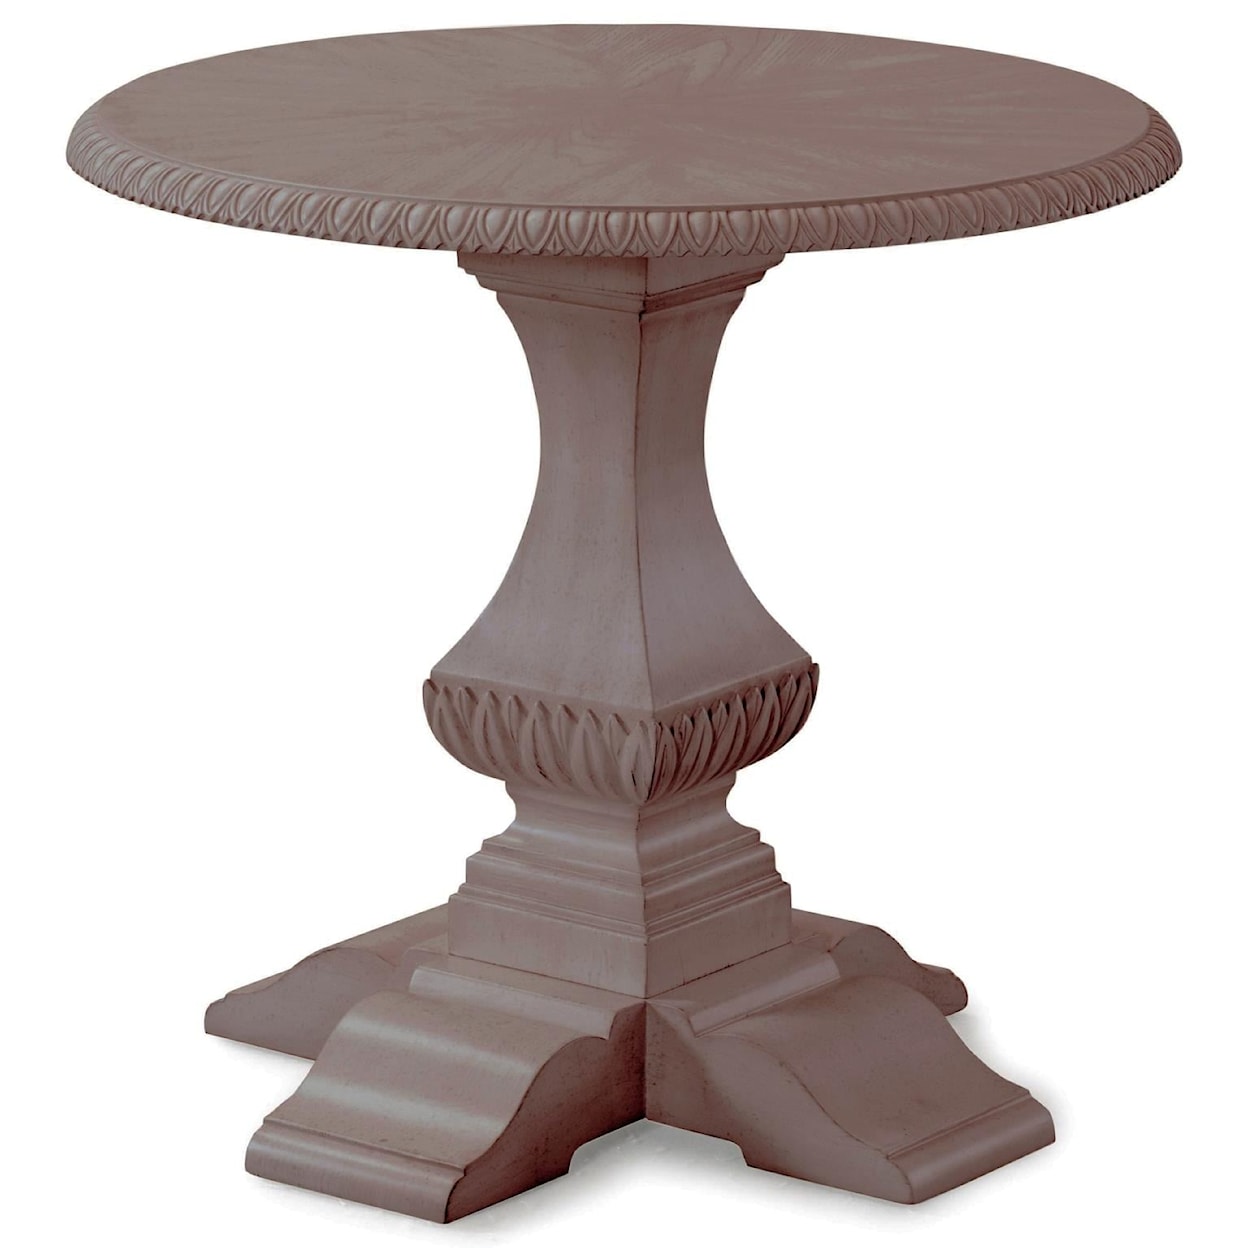 Trisha Yearwood Home Collection by Legacy Classic Jasper County Round End Table